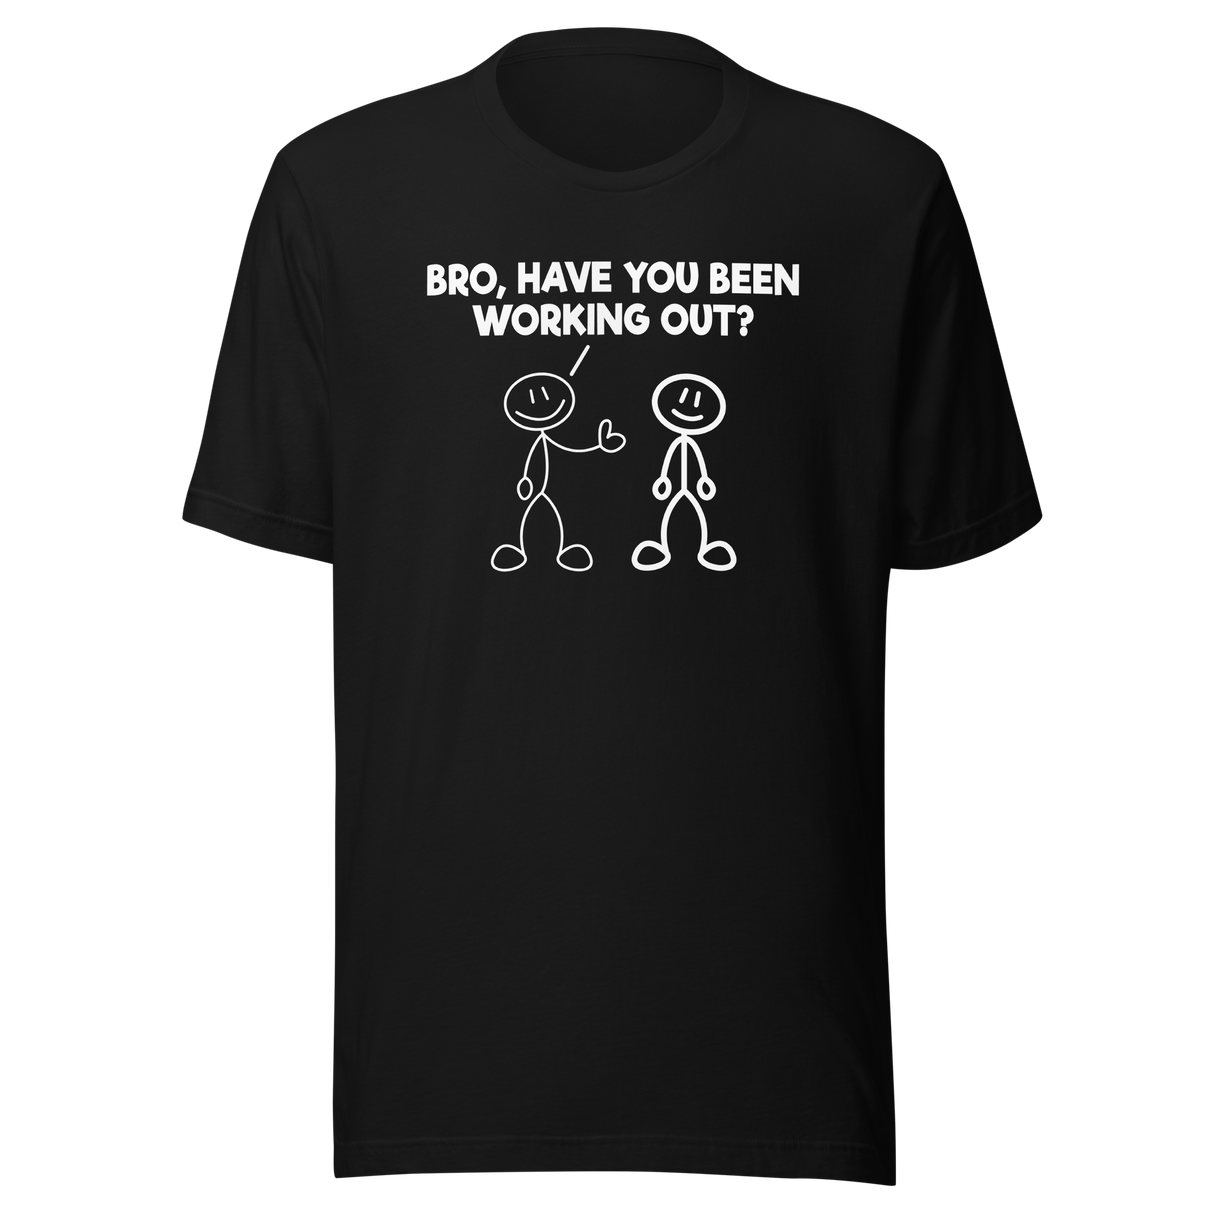 bro-have-you-been-working-out-fitness-tee-funny-t-shirt-muscle-tee-gym-t-shirt-exercise-tee#color_black